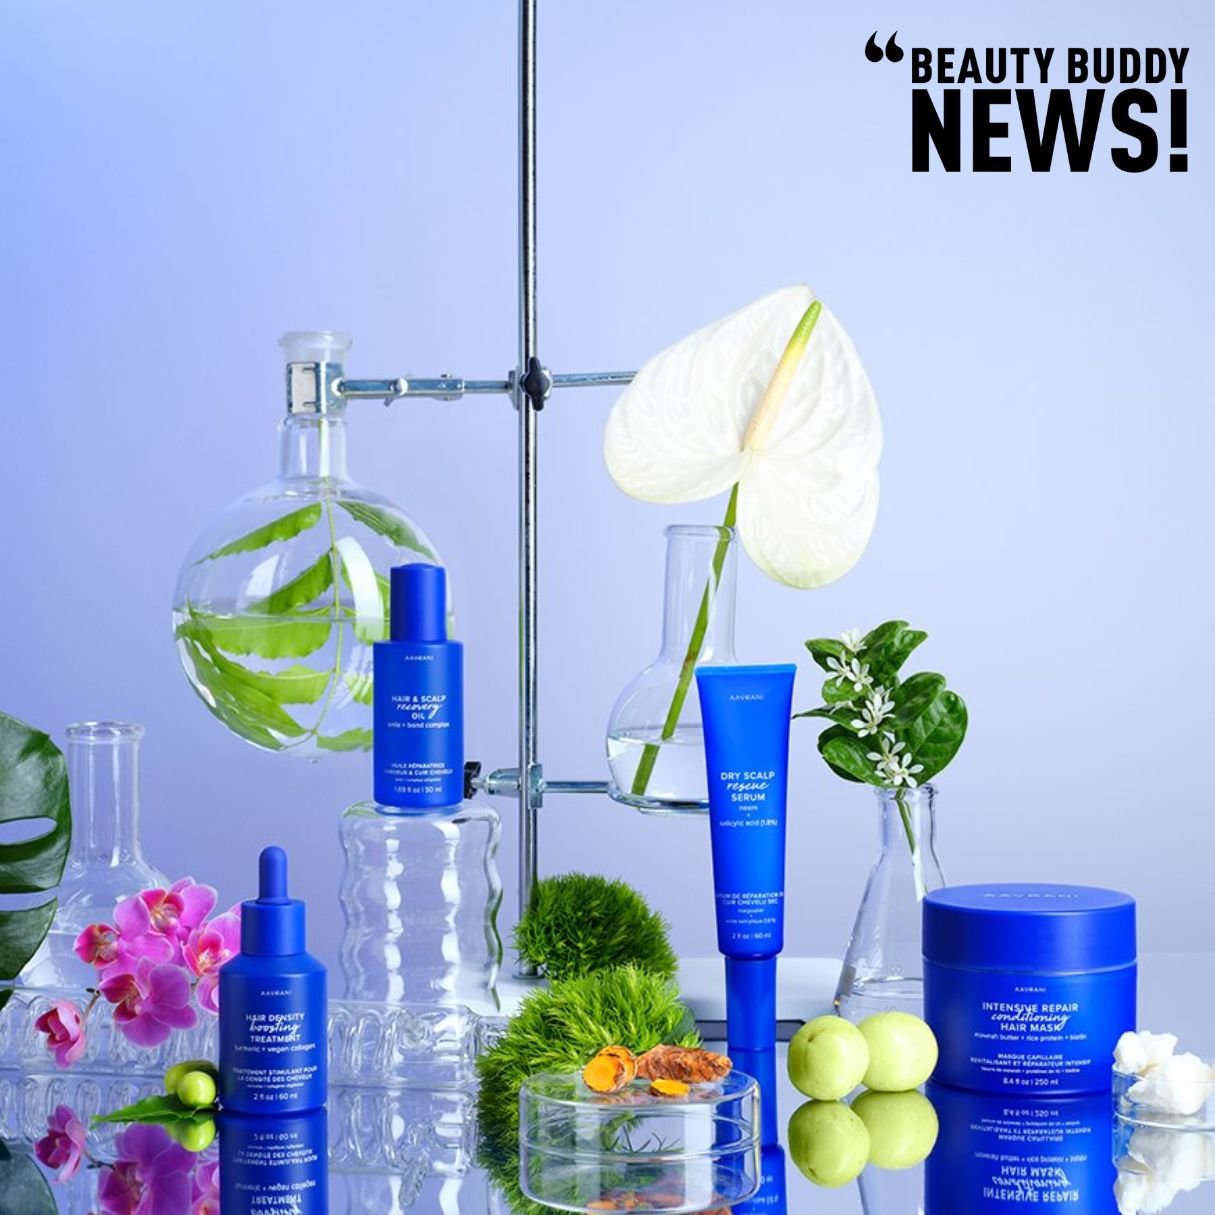 @aavrani collaborates with Lilly Singh to launch four scalp products featuring turmeric, neem, ashwagandha, and more. Colour-safe, vegan, cruelty-free, and safe for pregnant and nursing women, the line elevates haircare. Singh humorously praises AAVR